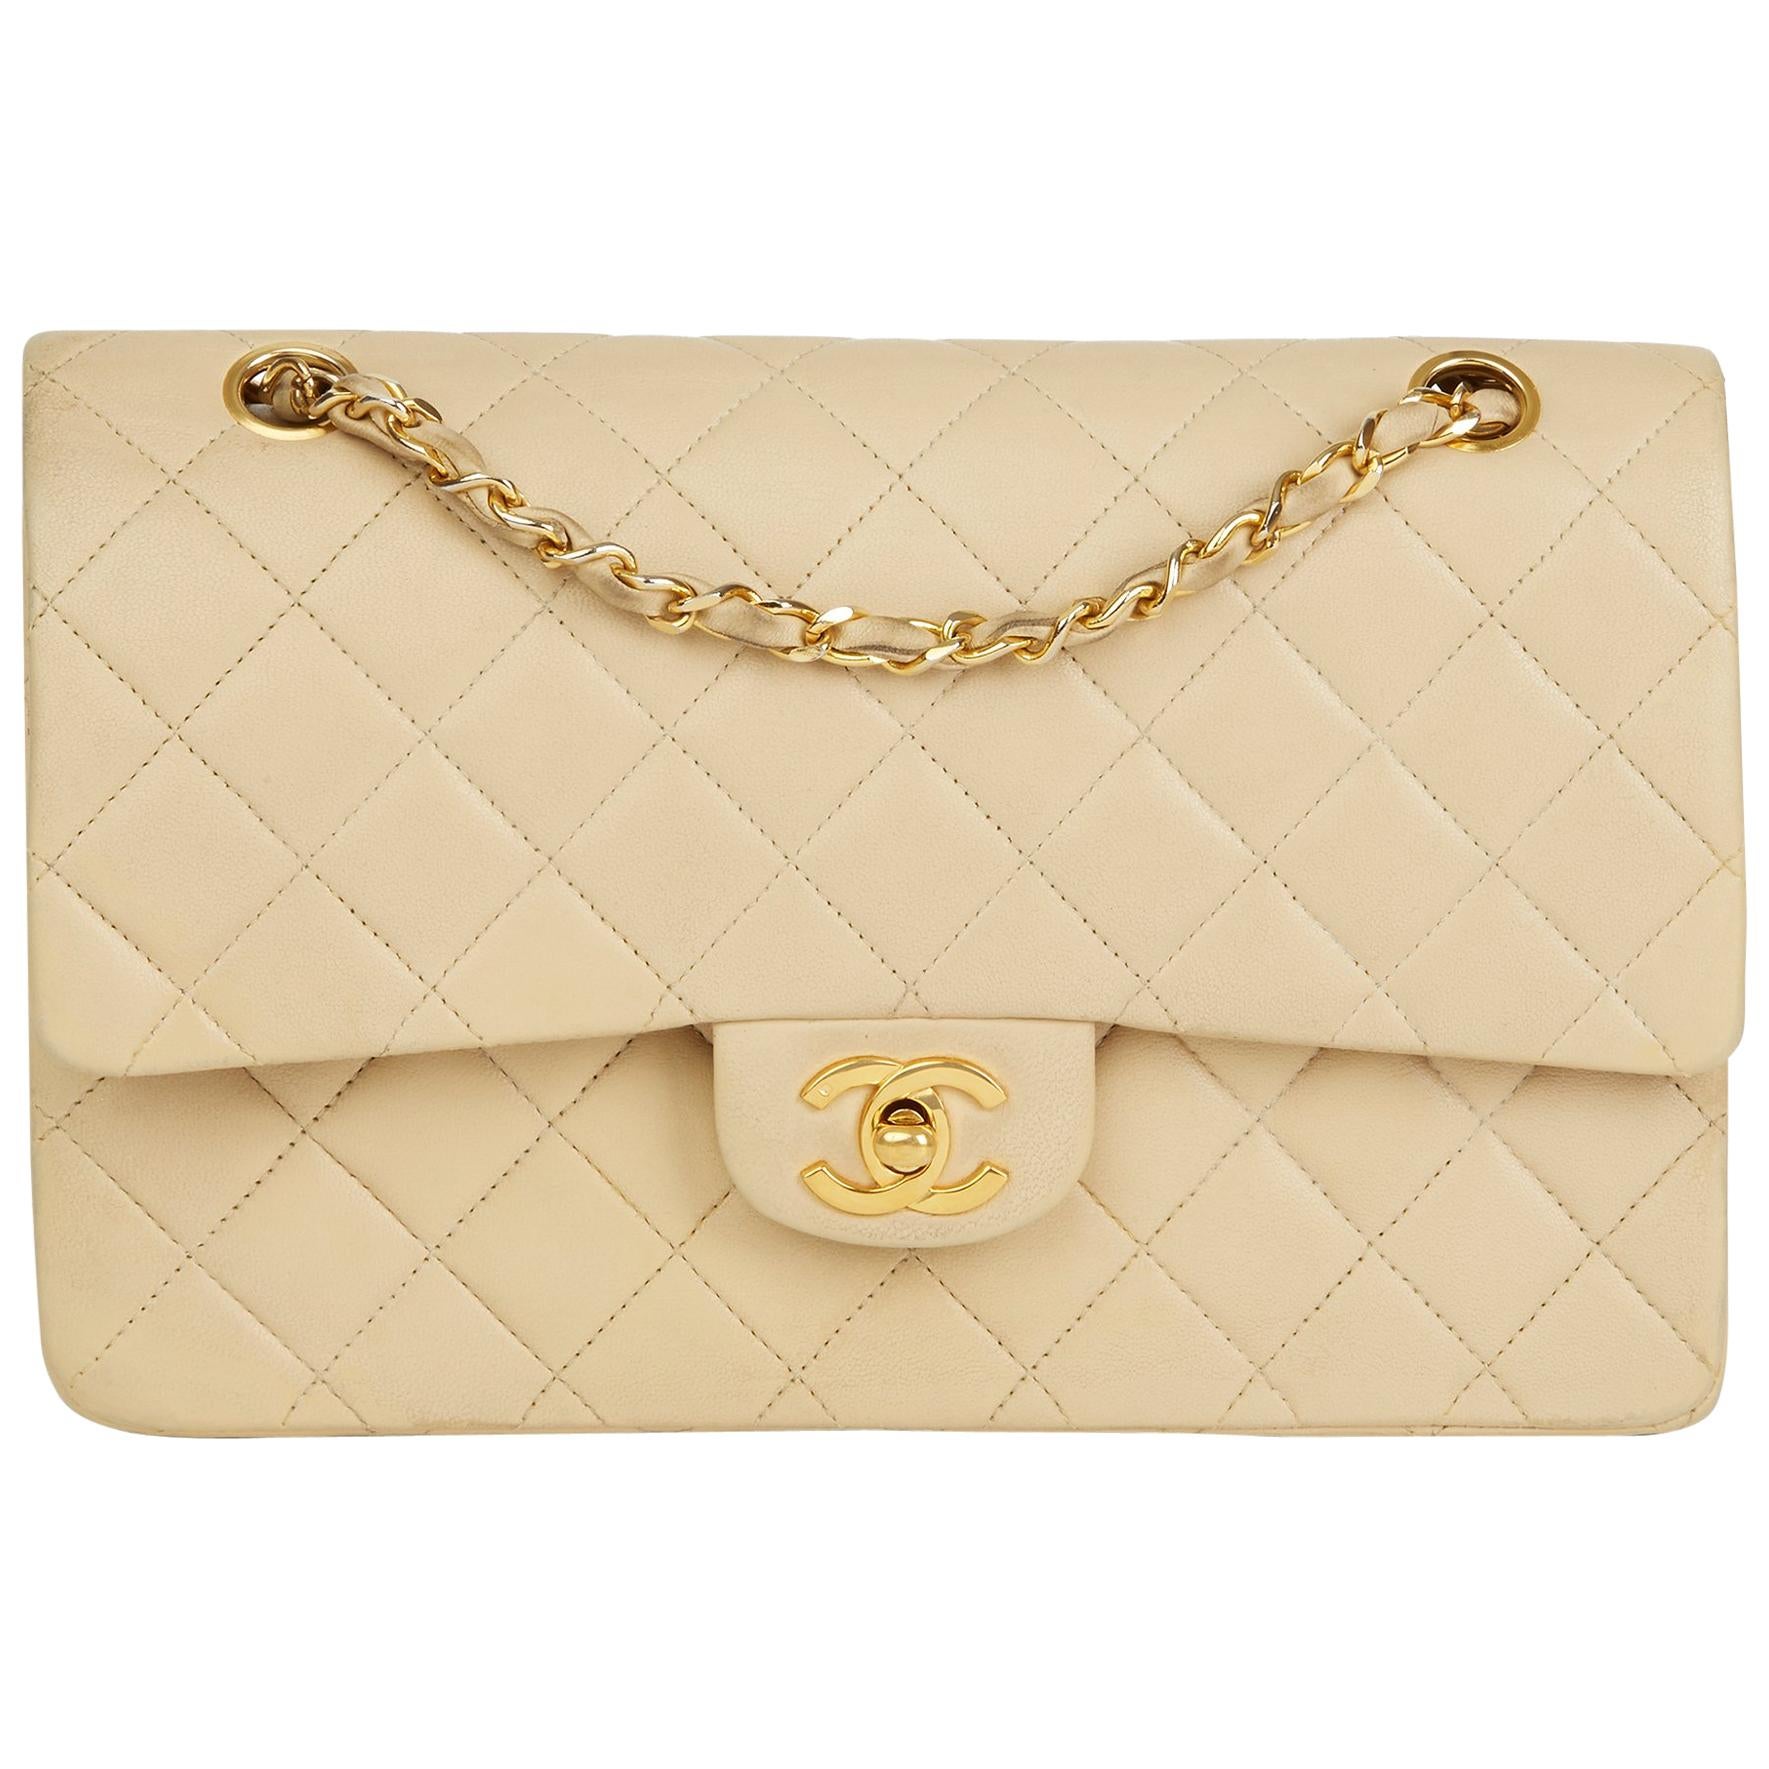 1986 Chanel Beige Quilted Lambskin Vintage Classic Double Flap